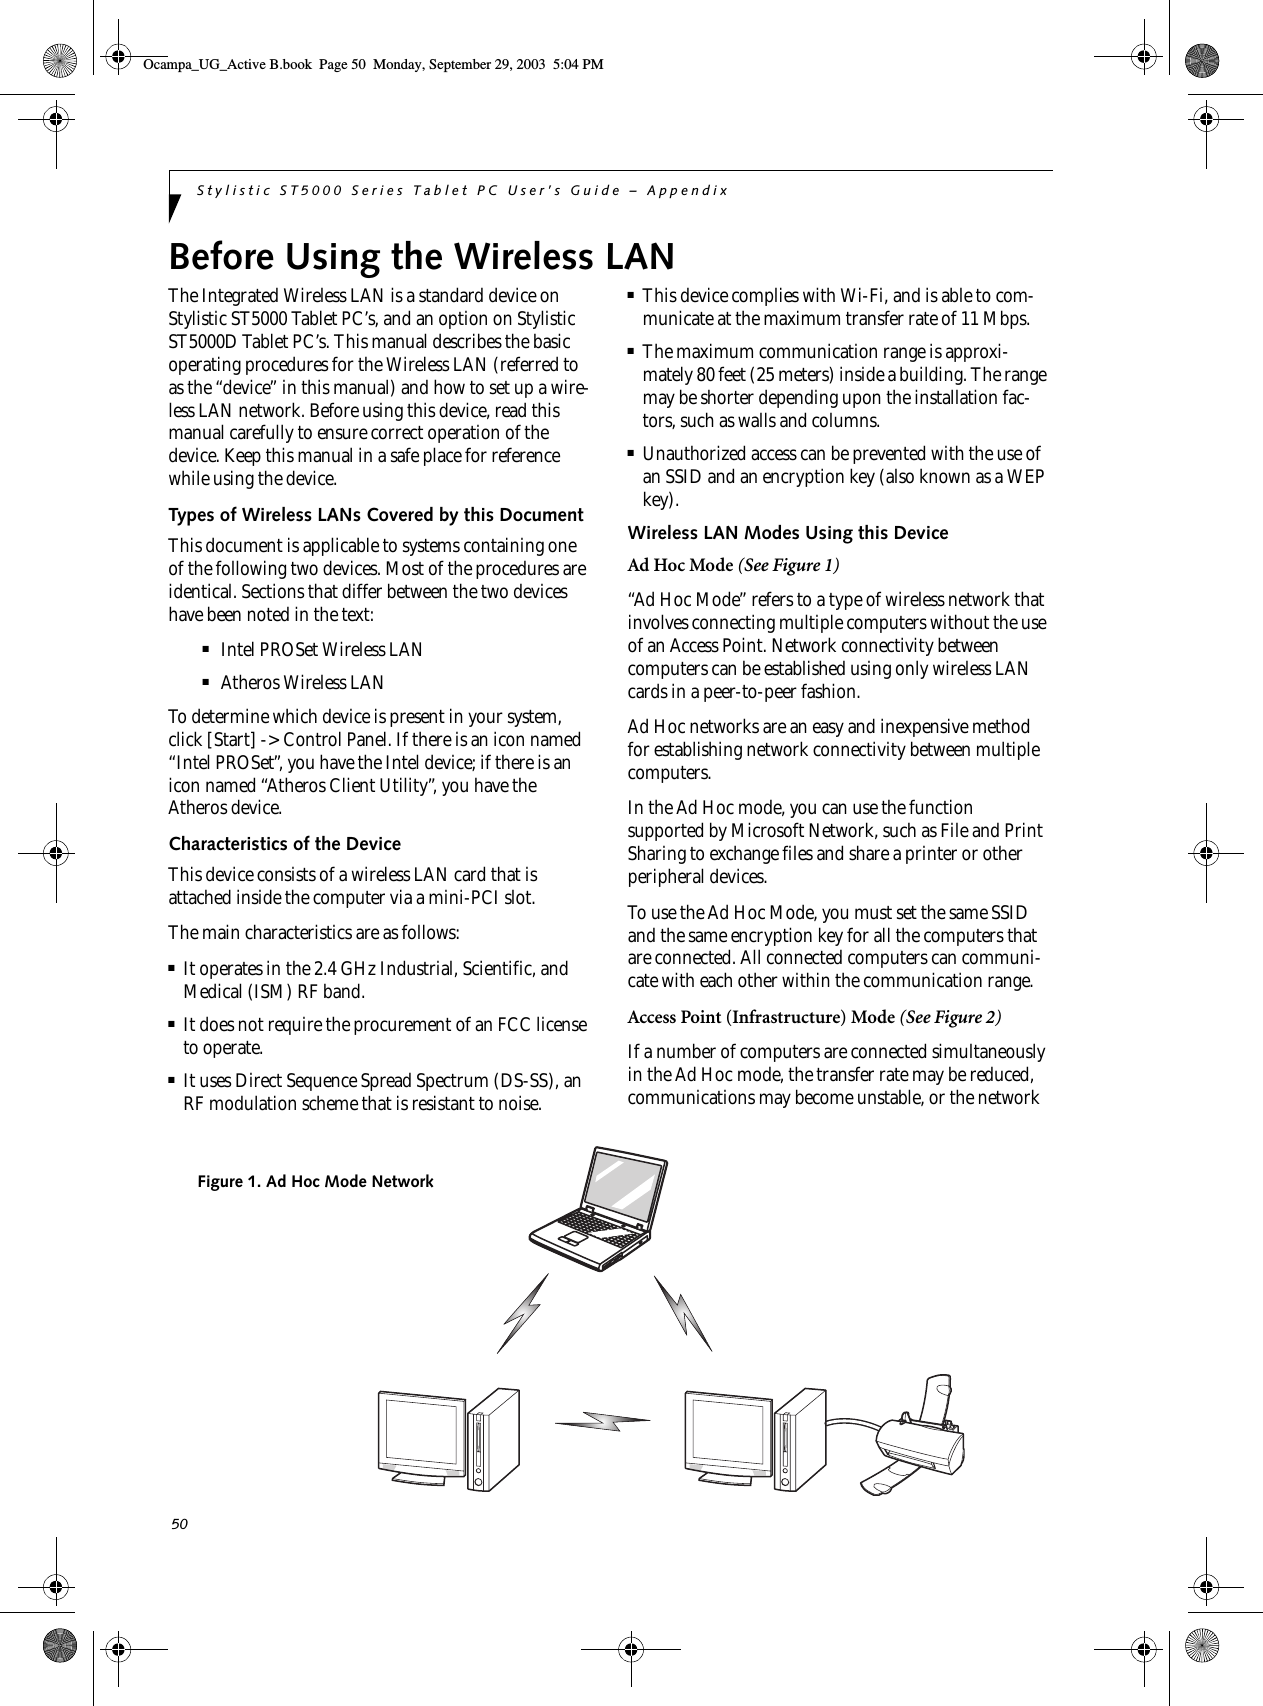 50Stylistic ST5000 Series Tablet PC User’s Guide – AppendixBefore Using the Wireless LAN The Integrated Wireless LAN is a standard device on Stylistic ST5000 Tablet PC’s, and an option on Stylistic ST5000D Tablet PC’s. This manual describes the basic operating procedures for the Wireless LAN (referred to as the “device” in this manual) and how to set up a wire-less LAN network. Before using this device, read this manual carefully to ensure correct operation of the device. Keep this manual in a safe place for reference while using the device.Types of Wireless LANs Covered by this DocumentThis document is applicable to systems containing one of the following two devices. Most of the procedures are identical. Sections that differ between the two devices have been noted in the text:■Intel PROSet Wireless LAN■Atheros Wireless LANTo determine which device is present in your system, click [Start] -&gt; Control Panel. If there is an icon named “Intel PROSet”, you have the Intel device; if there is an icon named “Atheros Client Utility”, you have the Atheros device. Characteristics of the DeviceThis device consists of a wireless LAN card that is attached inside the computer via a mini-PCI slot.The main characteristics are as follows:■It operates in the 2.4 GHz Industrial, Scientific, and Medical (ISM) RF band.■It does not require the procurement of an FCC license to operate.■It uses Direct Sequence Spread Spectrum (DS-SS), an RF modulation scheme that is resistant to noise.■This device complies with Wi-Fi, and is able to com-municate at the maximum transfer rate of 11 Mbps.■The maximum communication range is approxi-mately 80 feet (25 meters) inside a building. The range may be shorter depending upon the installation fac-tors, such as walls and columns.■Unauthorized access can be prevented with the use of an SSID and an encryption key (also known as a WEP key).Wireless LAN Modes Using this DeviceAd Hoc Mode (See Figure 1)“Ad Hoc Mode” refers to a type of wireless network that involves connecting multiple computers without the use of an Access Point. Network connectivity between computers can be established using only wireless LAN cards in a peer-to-peer fashion.Ad Hoc networks are an easy and inexpensive method for establishing network connectivity between multiple computers.In the Ad Hoc mode, you can use the function supported by Microsoft Network, such as File and Print Sharing to exchange files and share a printer or other peripheral devices.To use the Ad Hoc Mode, you must set the same SSID and the same encryption key for all the computers that are connected. All connected computers can communi-cate with each other within the communication range. Access Point (Infrastructure) Mode (See Figure 2)If a number of computers are connected simultaneously in the Ad Hoc mode, the transfer rate may be reduced, communications may become unstable, or the network Figure 1. Ad Hoc Mode NetworkOcampa_UG_Active B.book  Page 50  Monday, September 29, 2003  5:04 PM